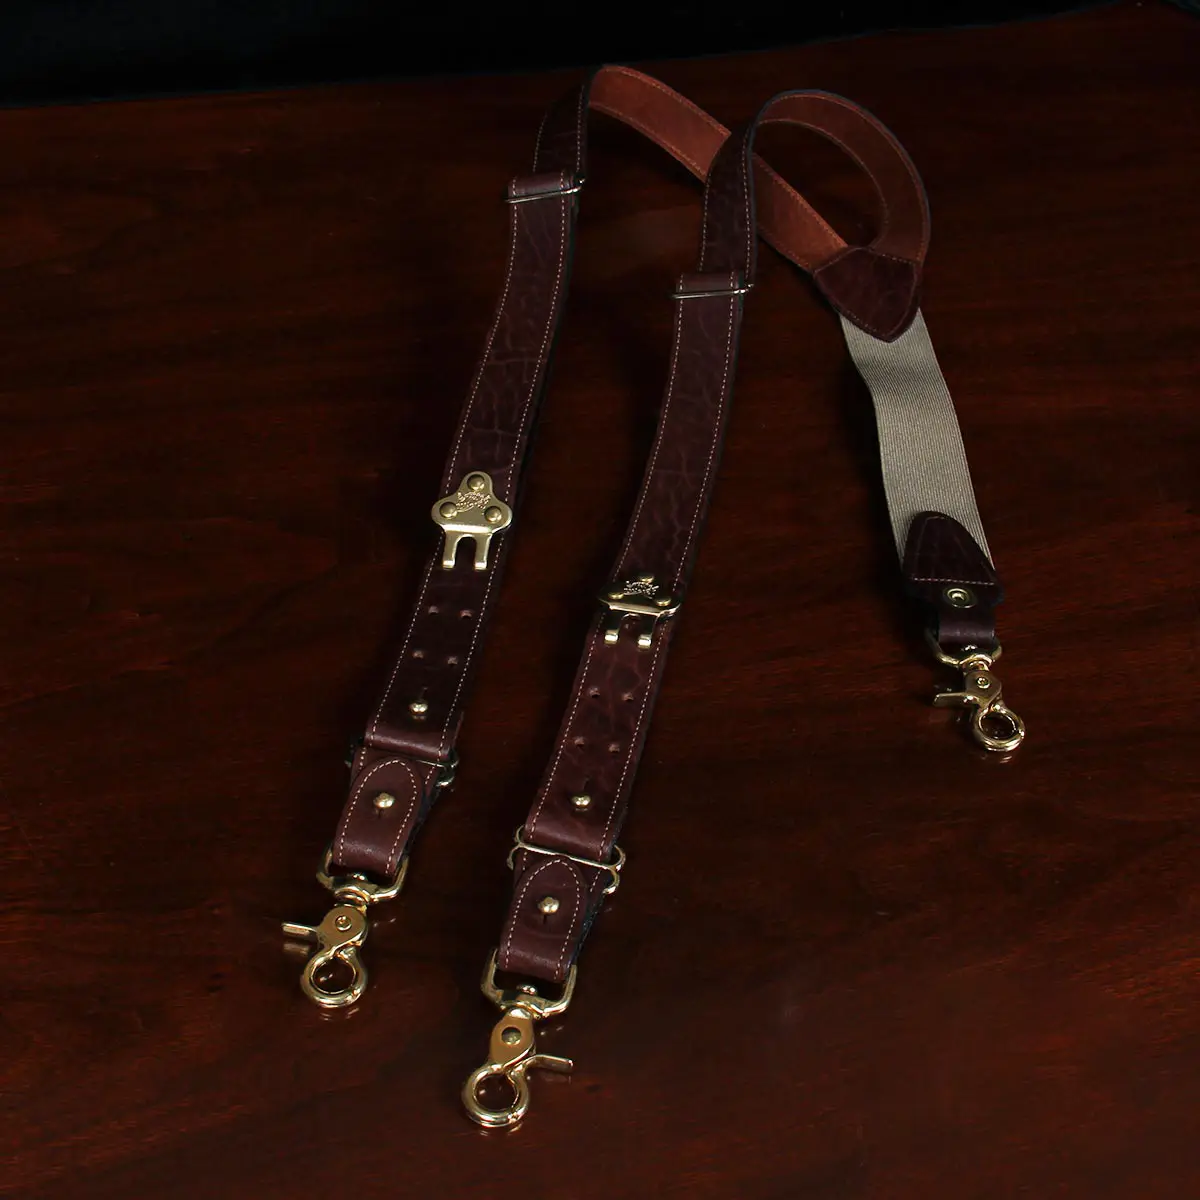 Handmade leather dress suspenders - handmade in the USA out of